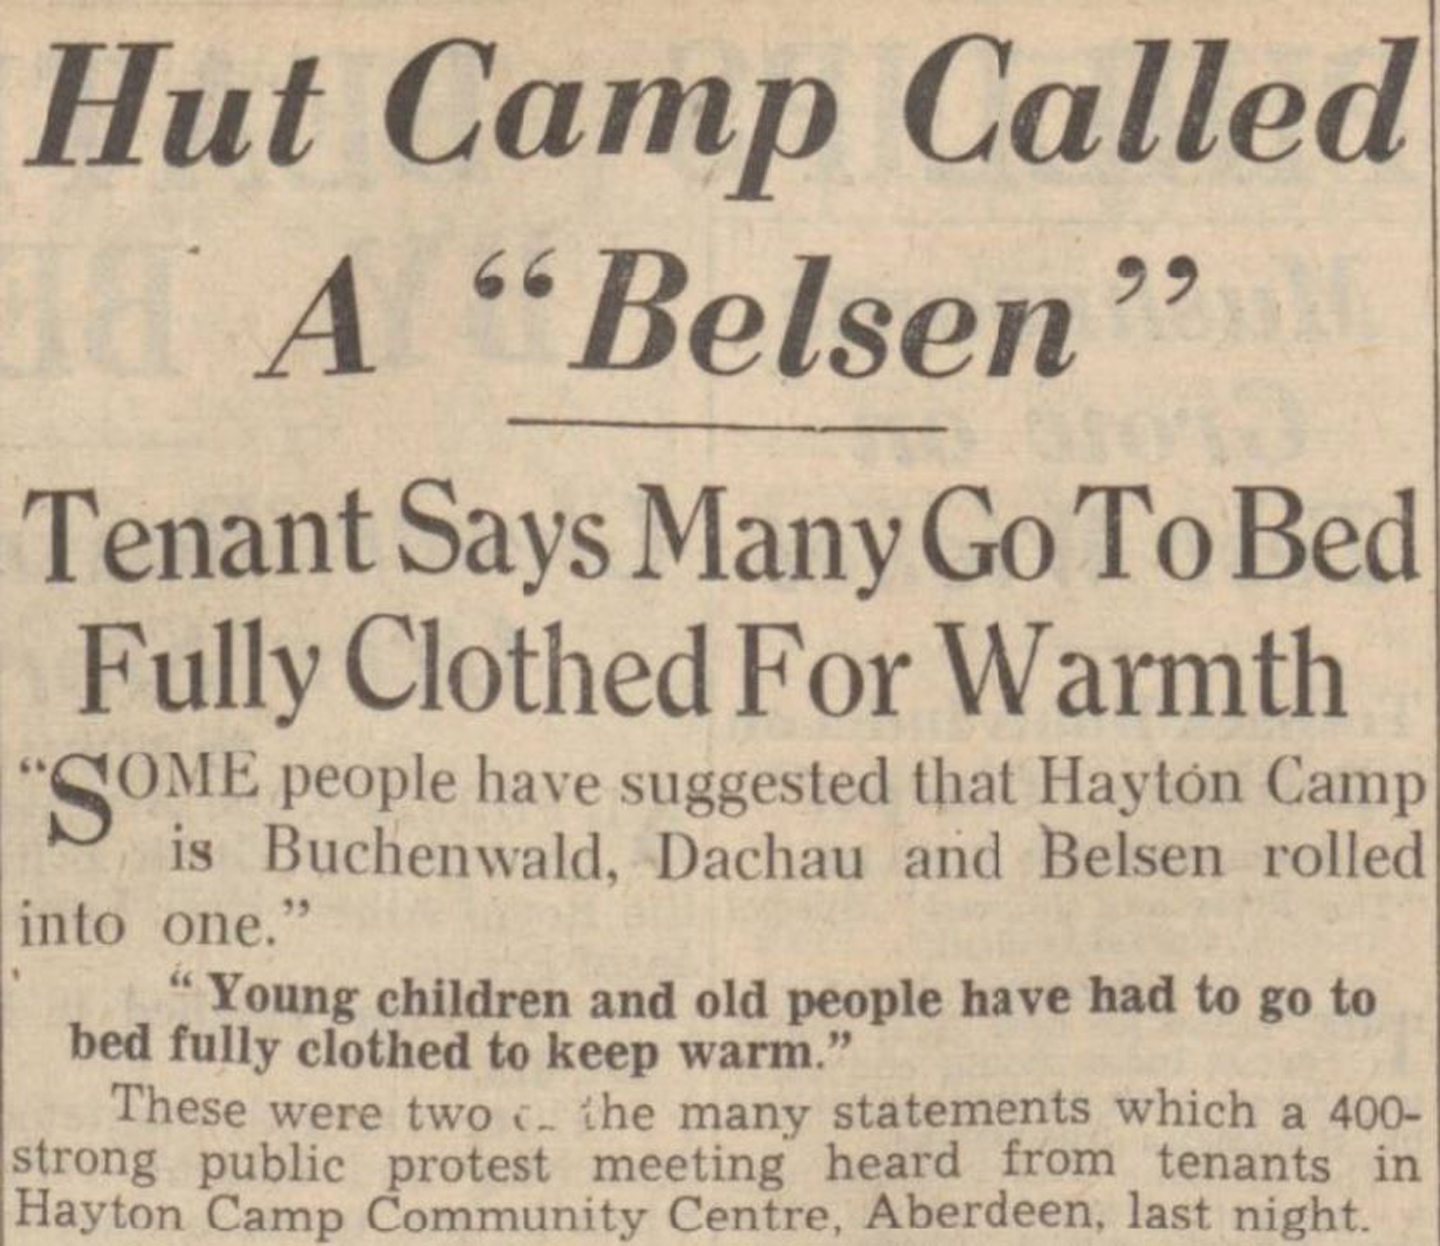 A headline reading "Hut Camp Called A 'Belsen': Tenant says many go to bed fully clothed for warmth"